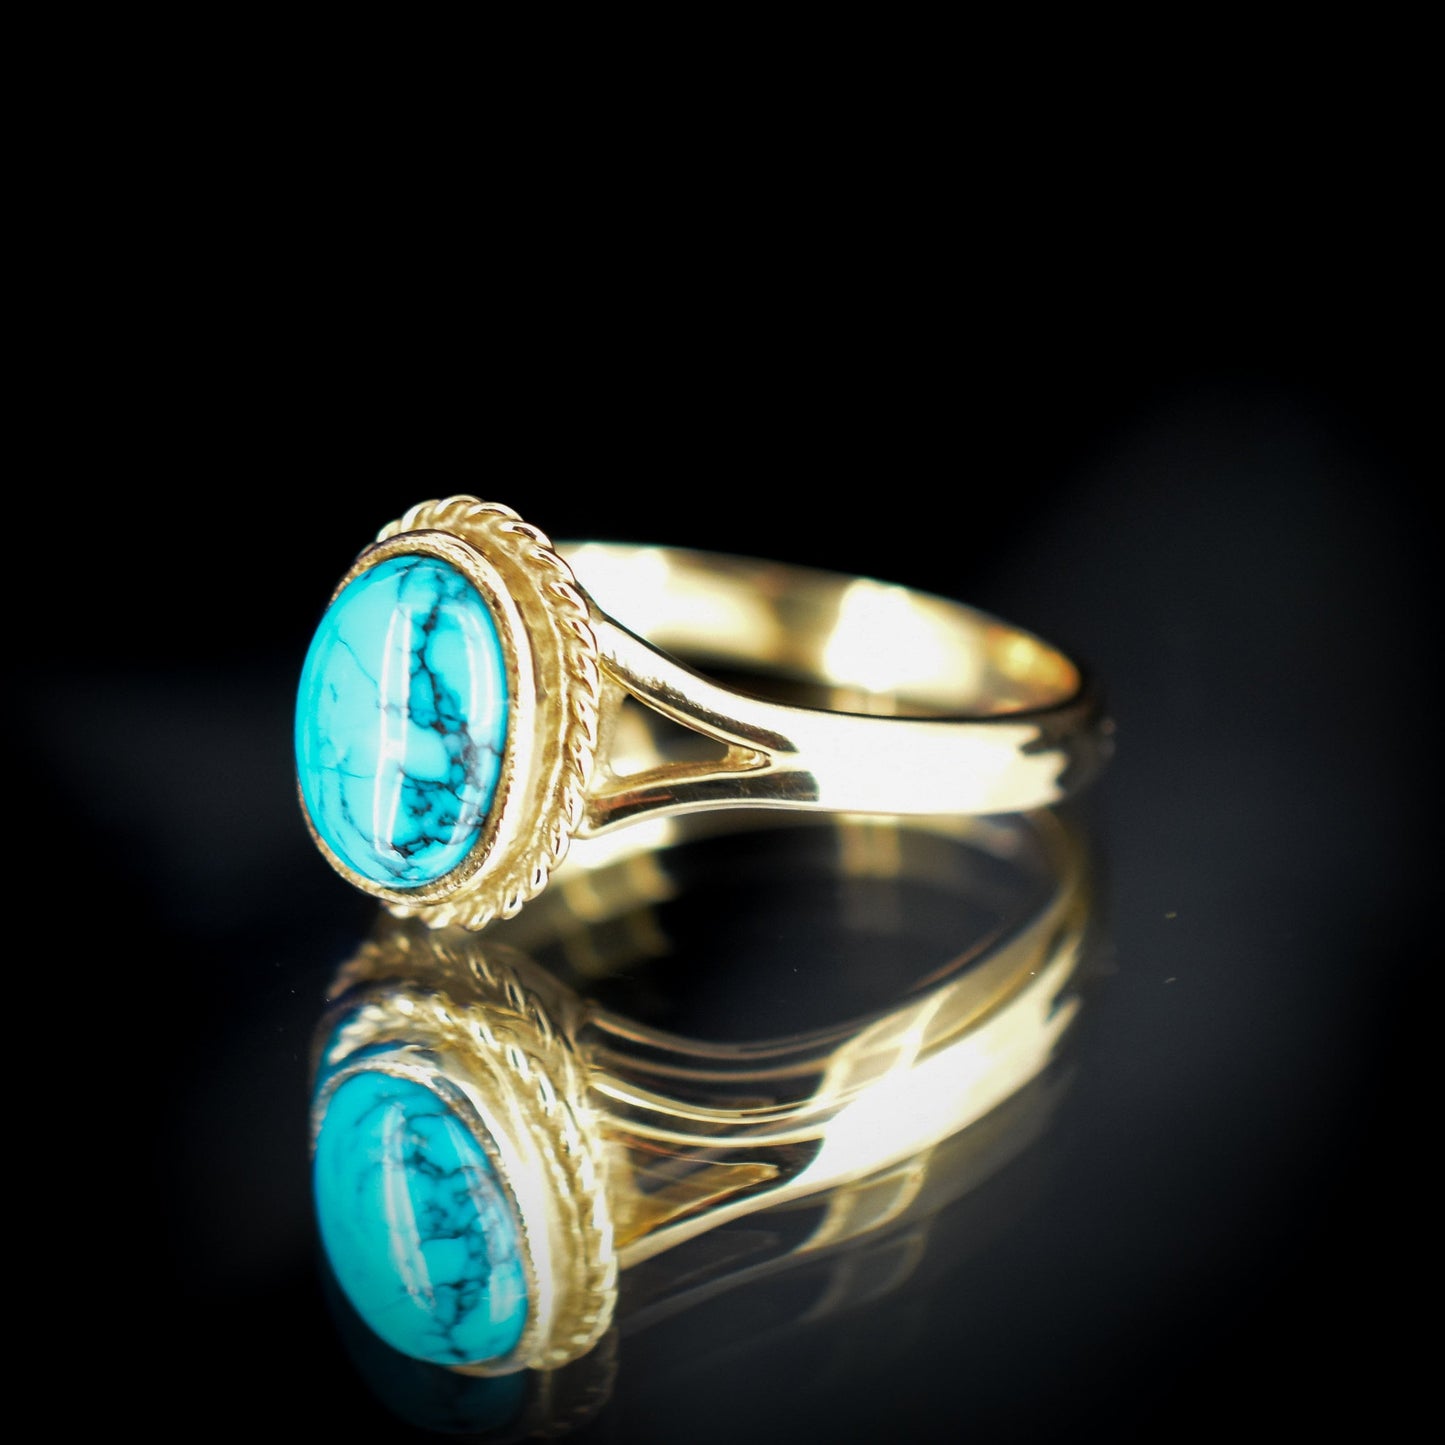 Vintage Style Matrix Turquoise Solitaire 9ct Yellow Gold Ring